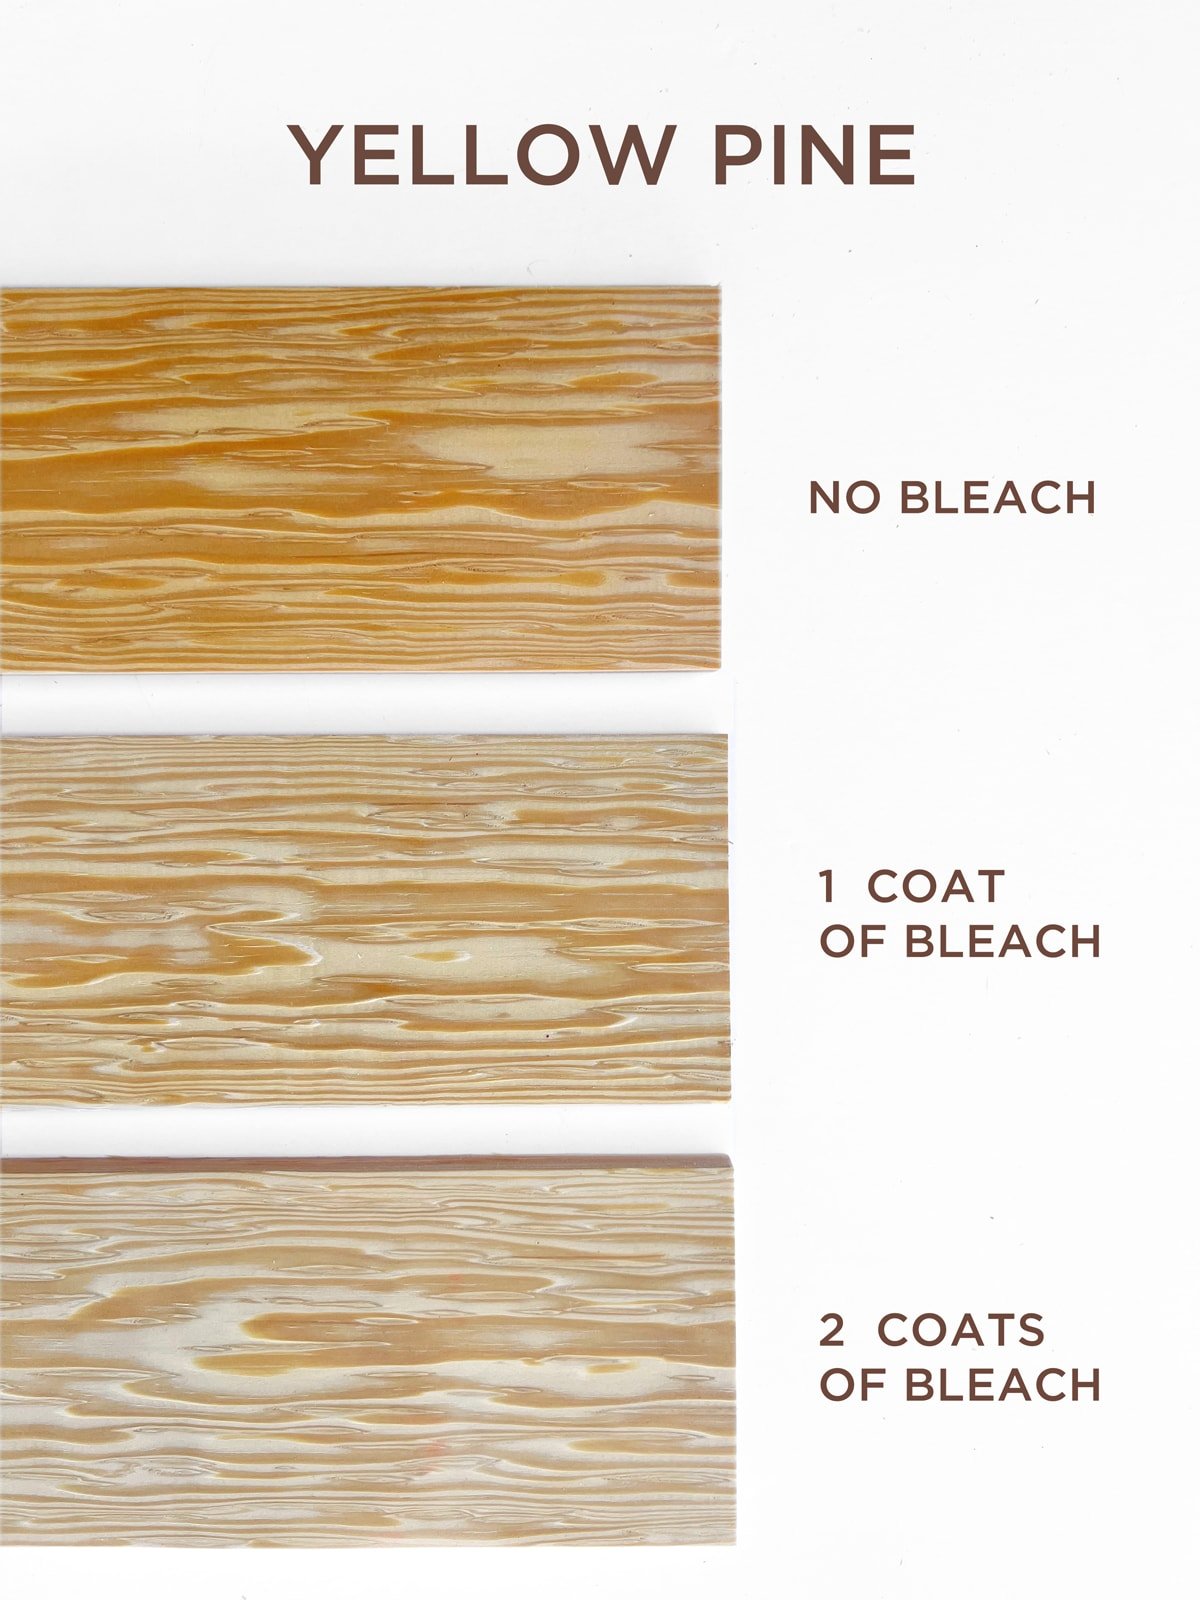 how to bleach yellow pine test